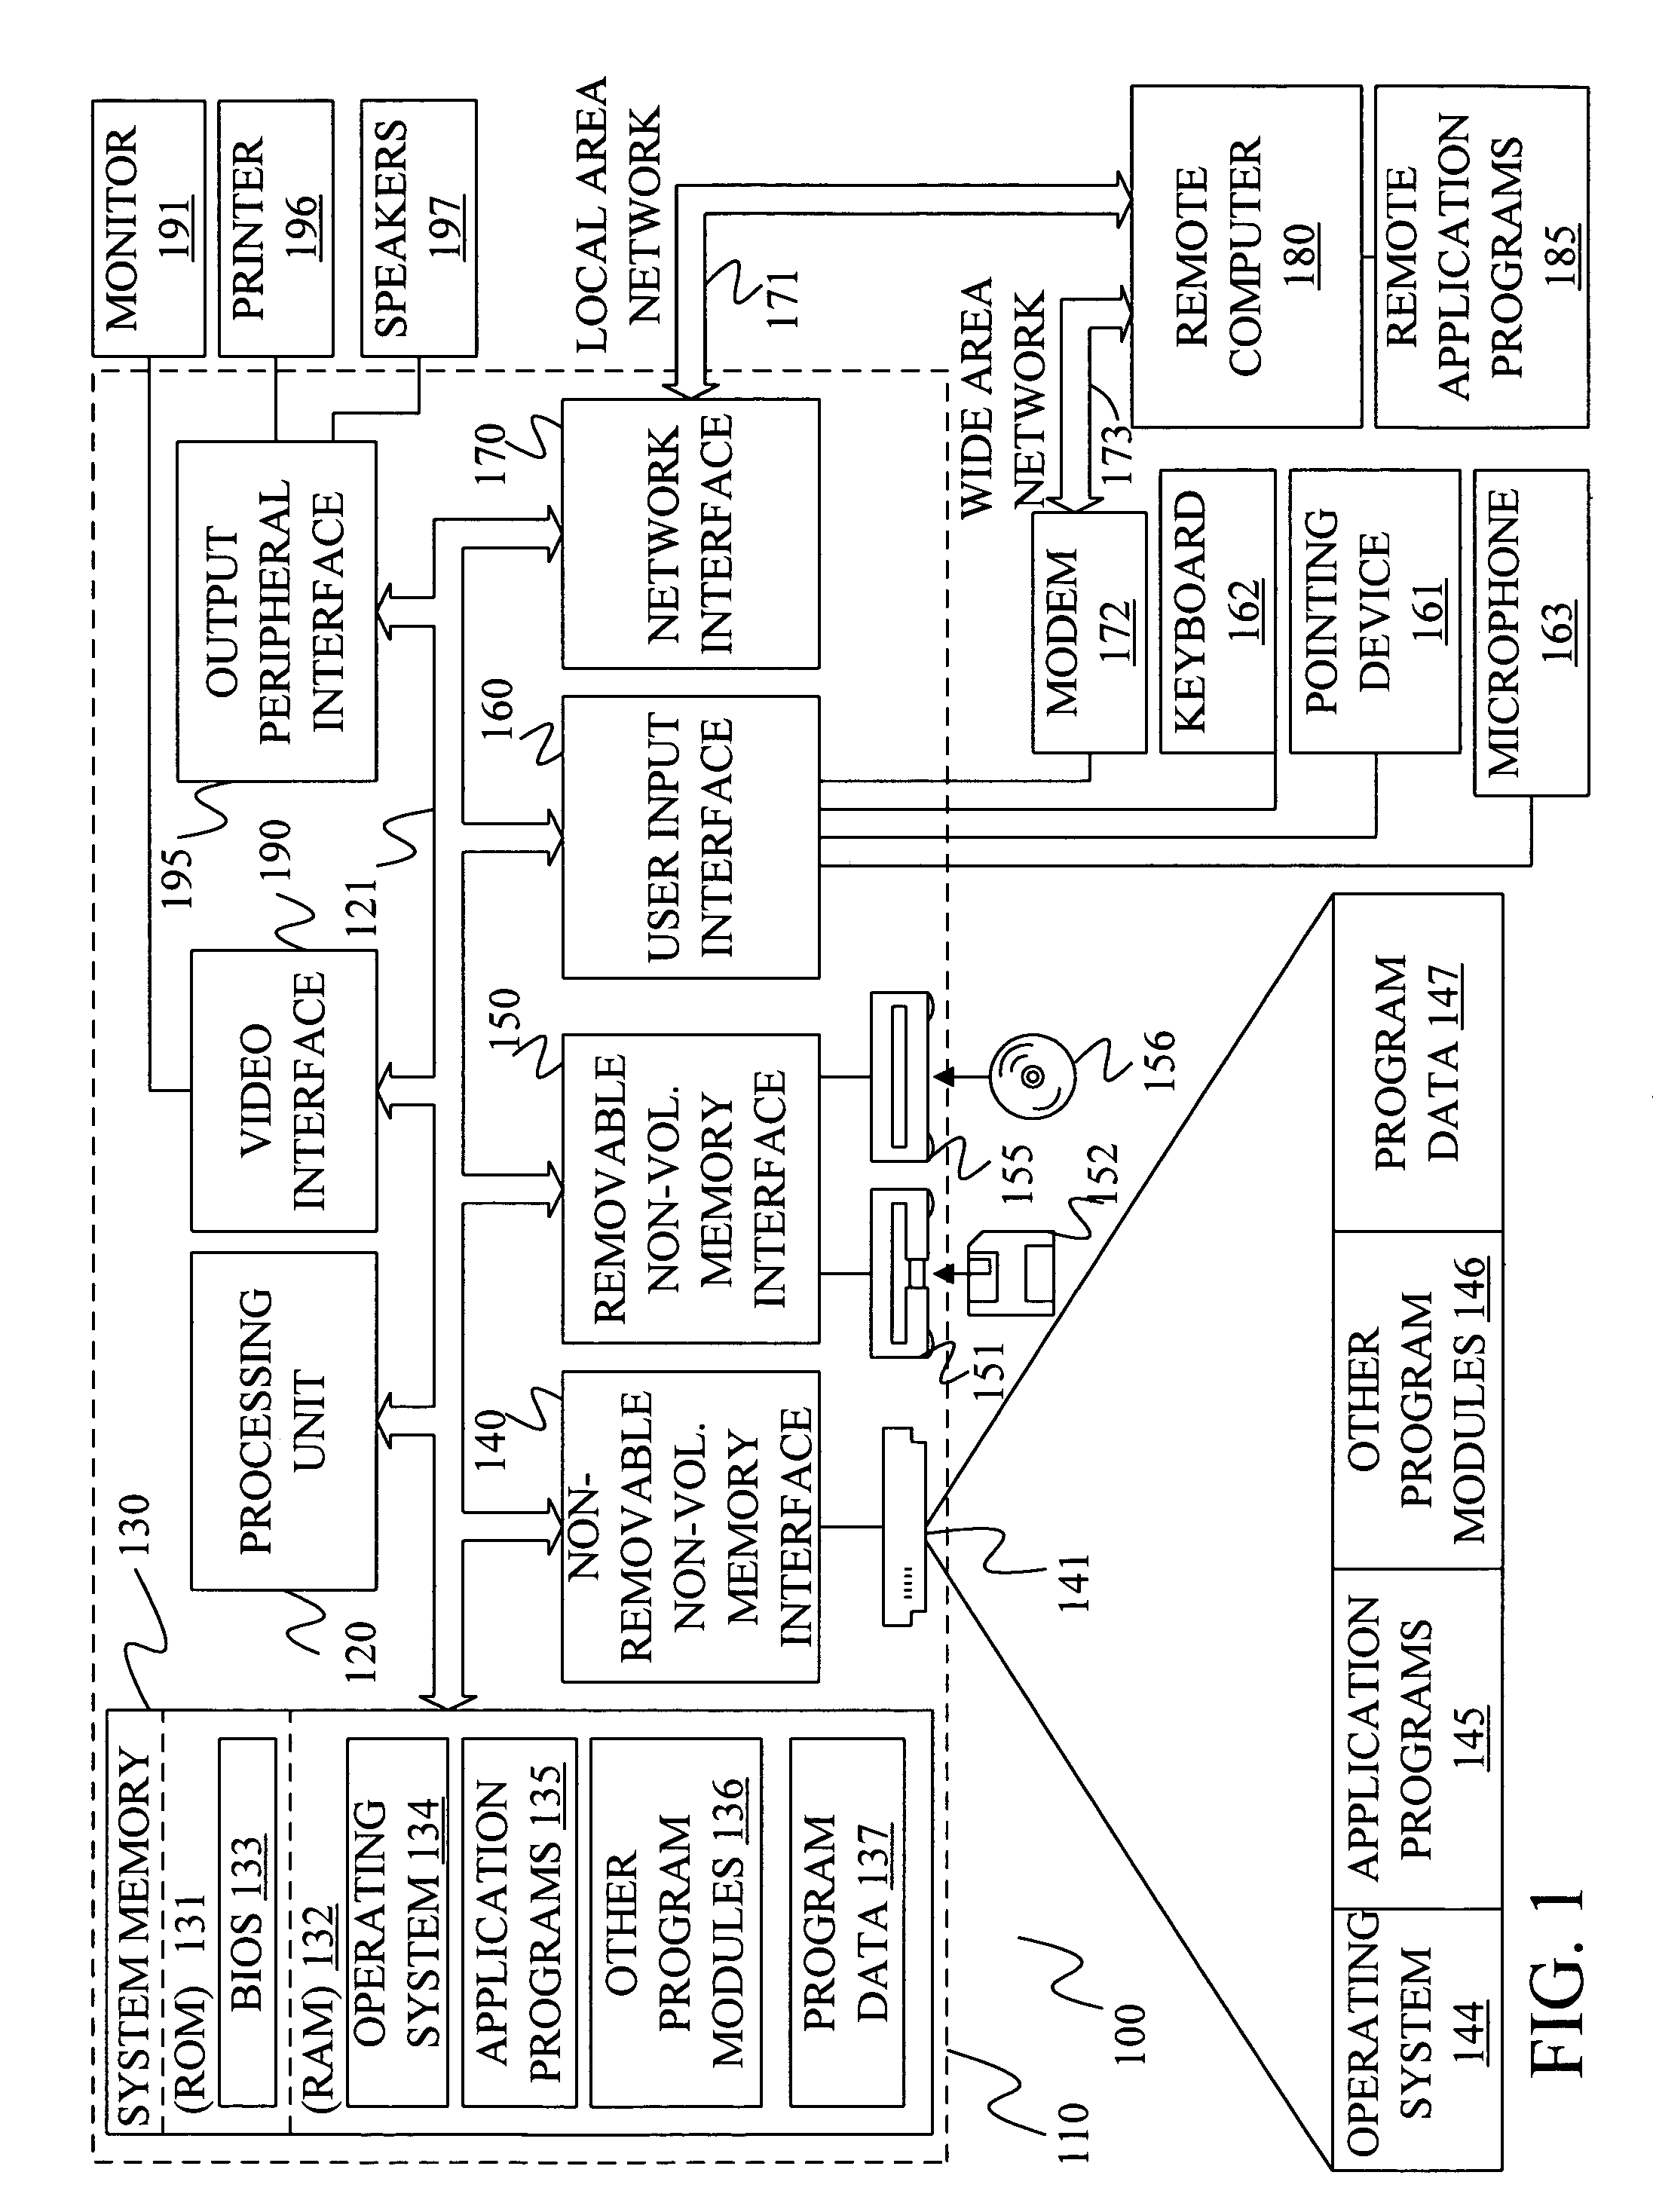 Method and apparatus using harmonic-model-based front end for robust speech recognition